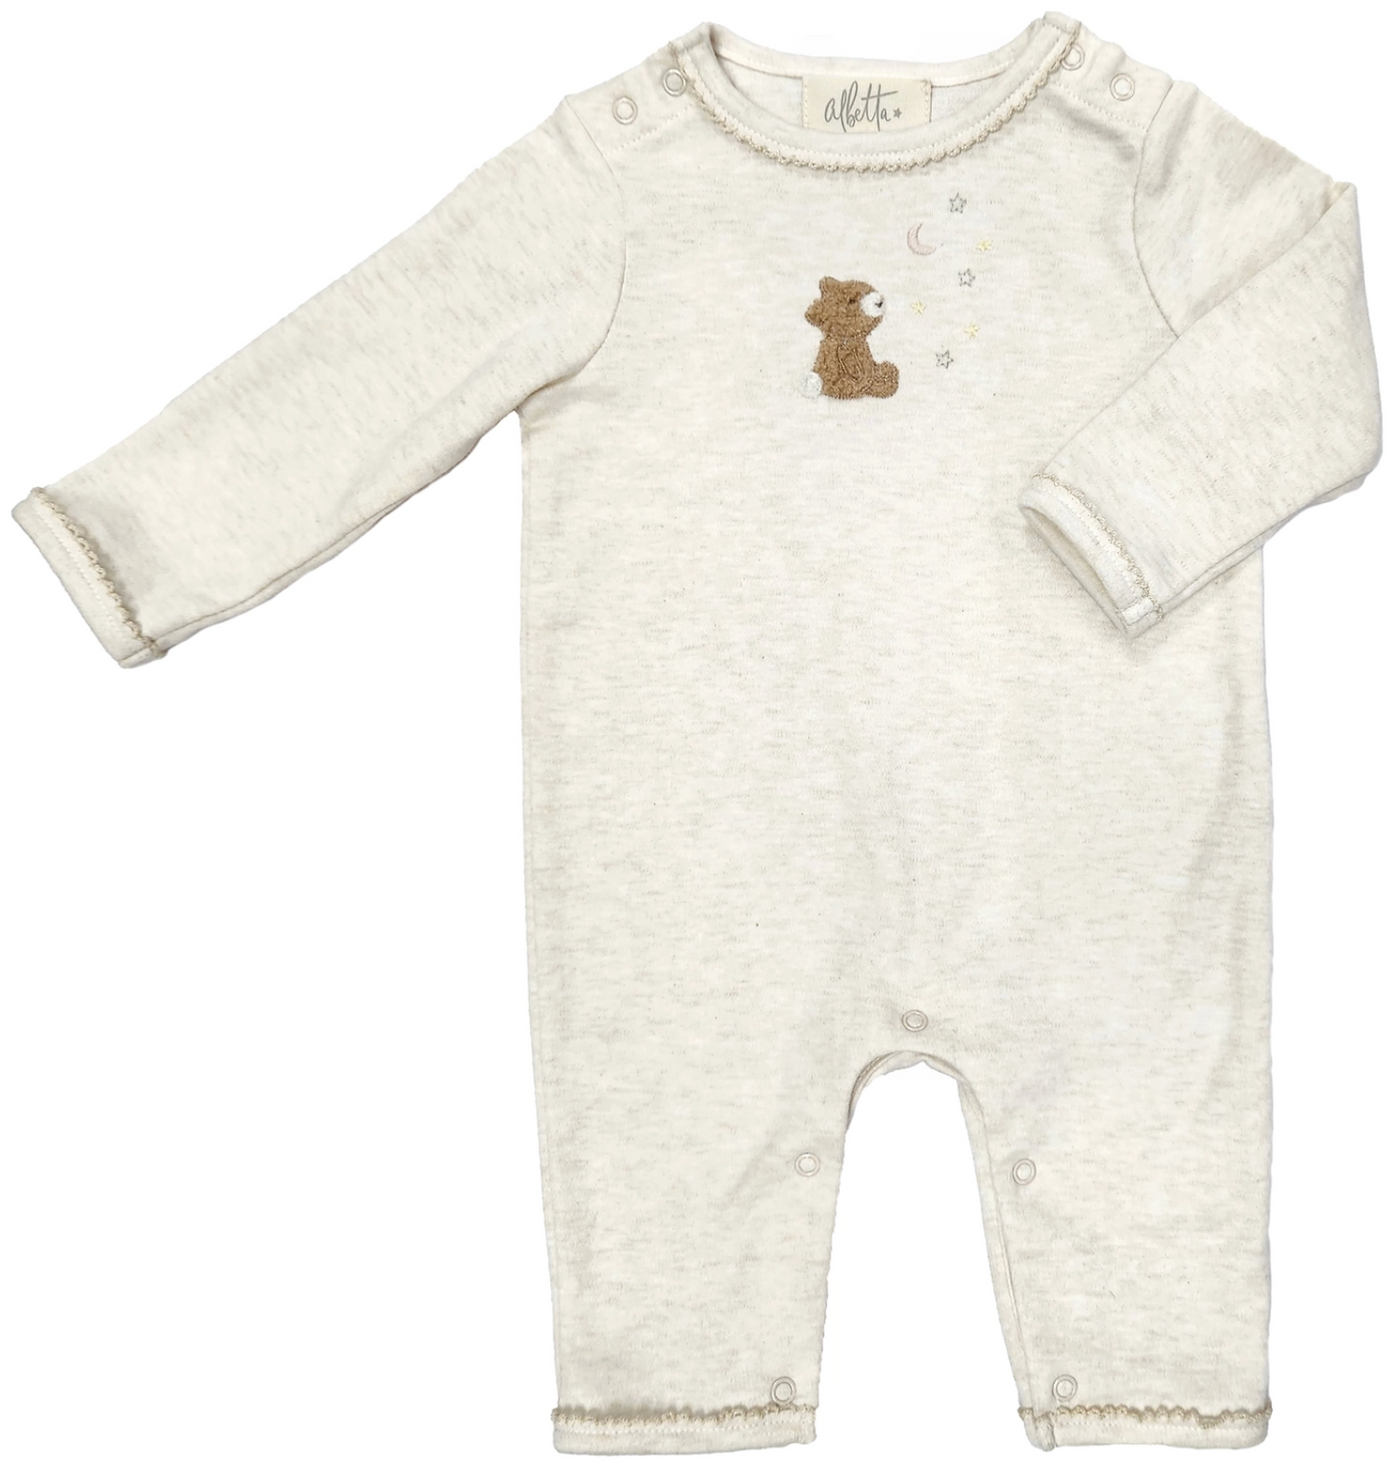 BABYGRO DREAMING TEDDY (Available in 3 Sizes)